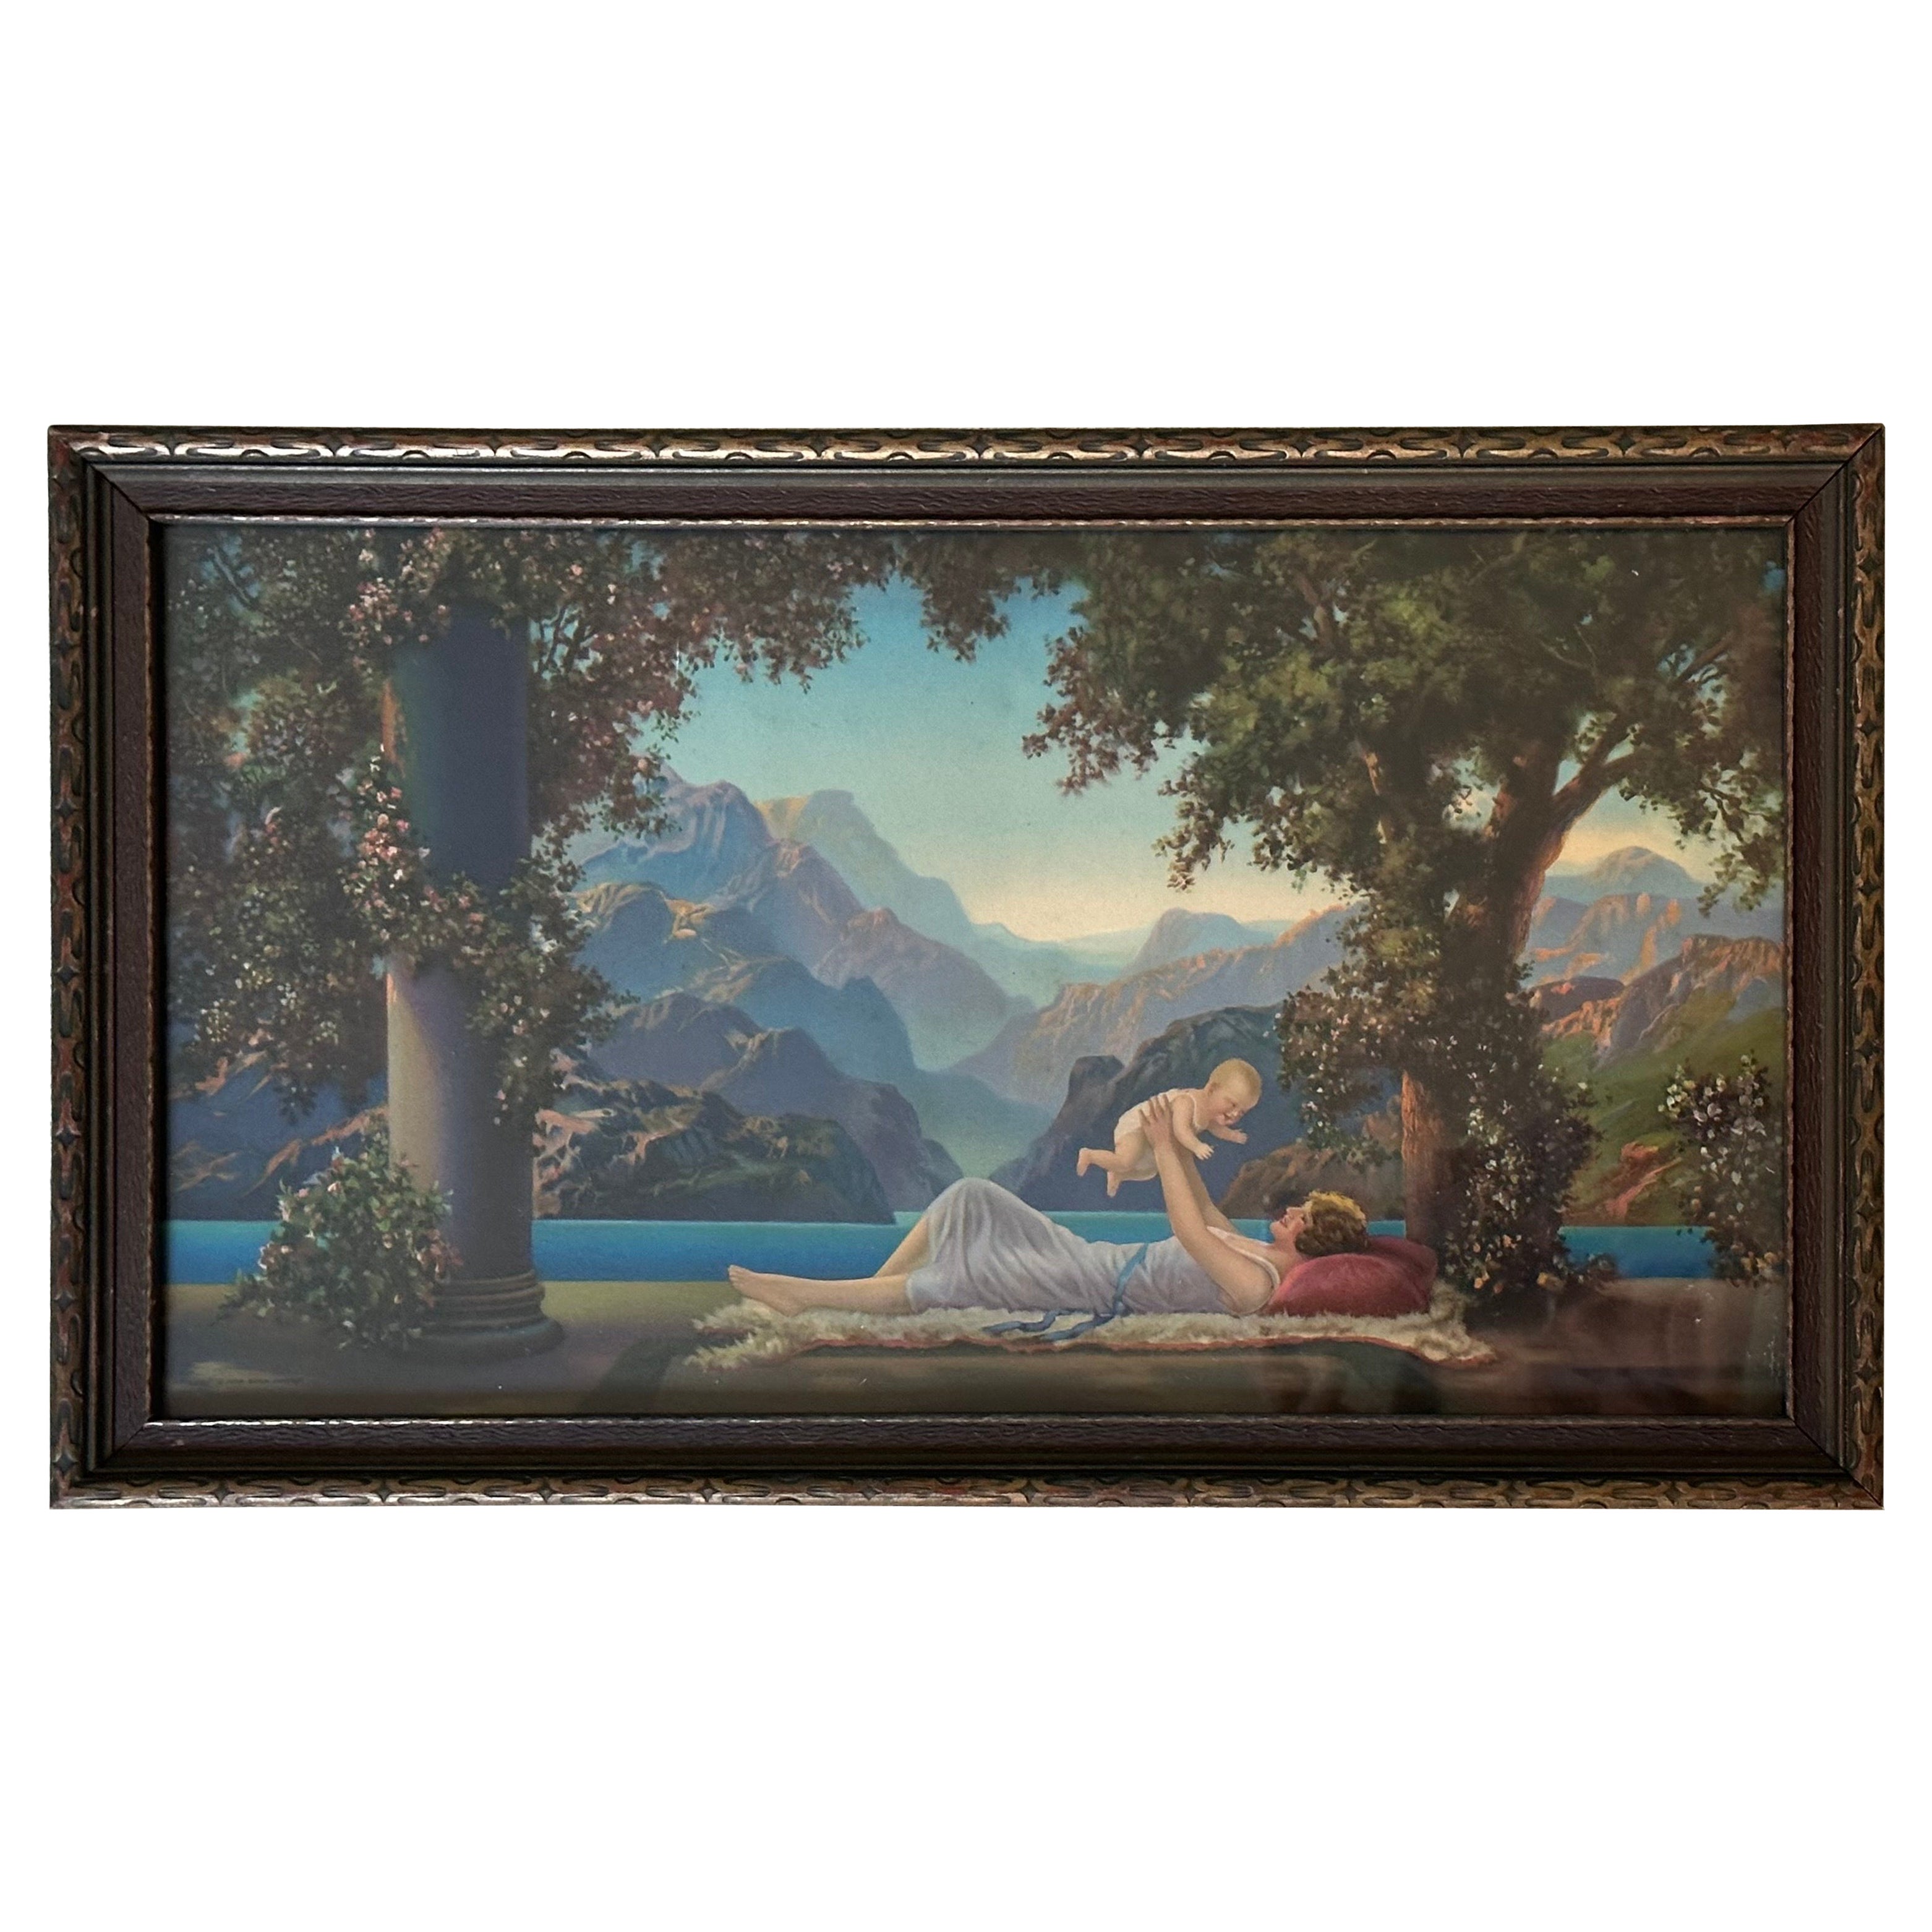 Antique "Love's Paradise" Lithograph by R. Atkinson Fox in Original Frame